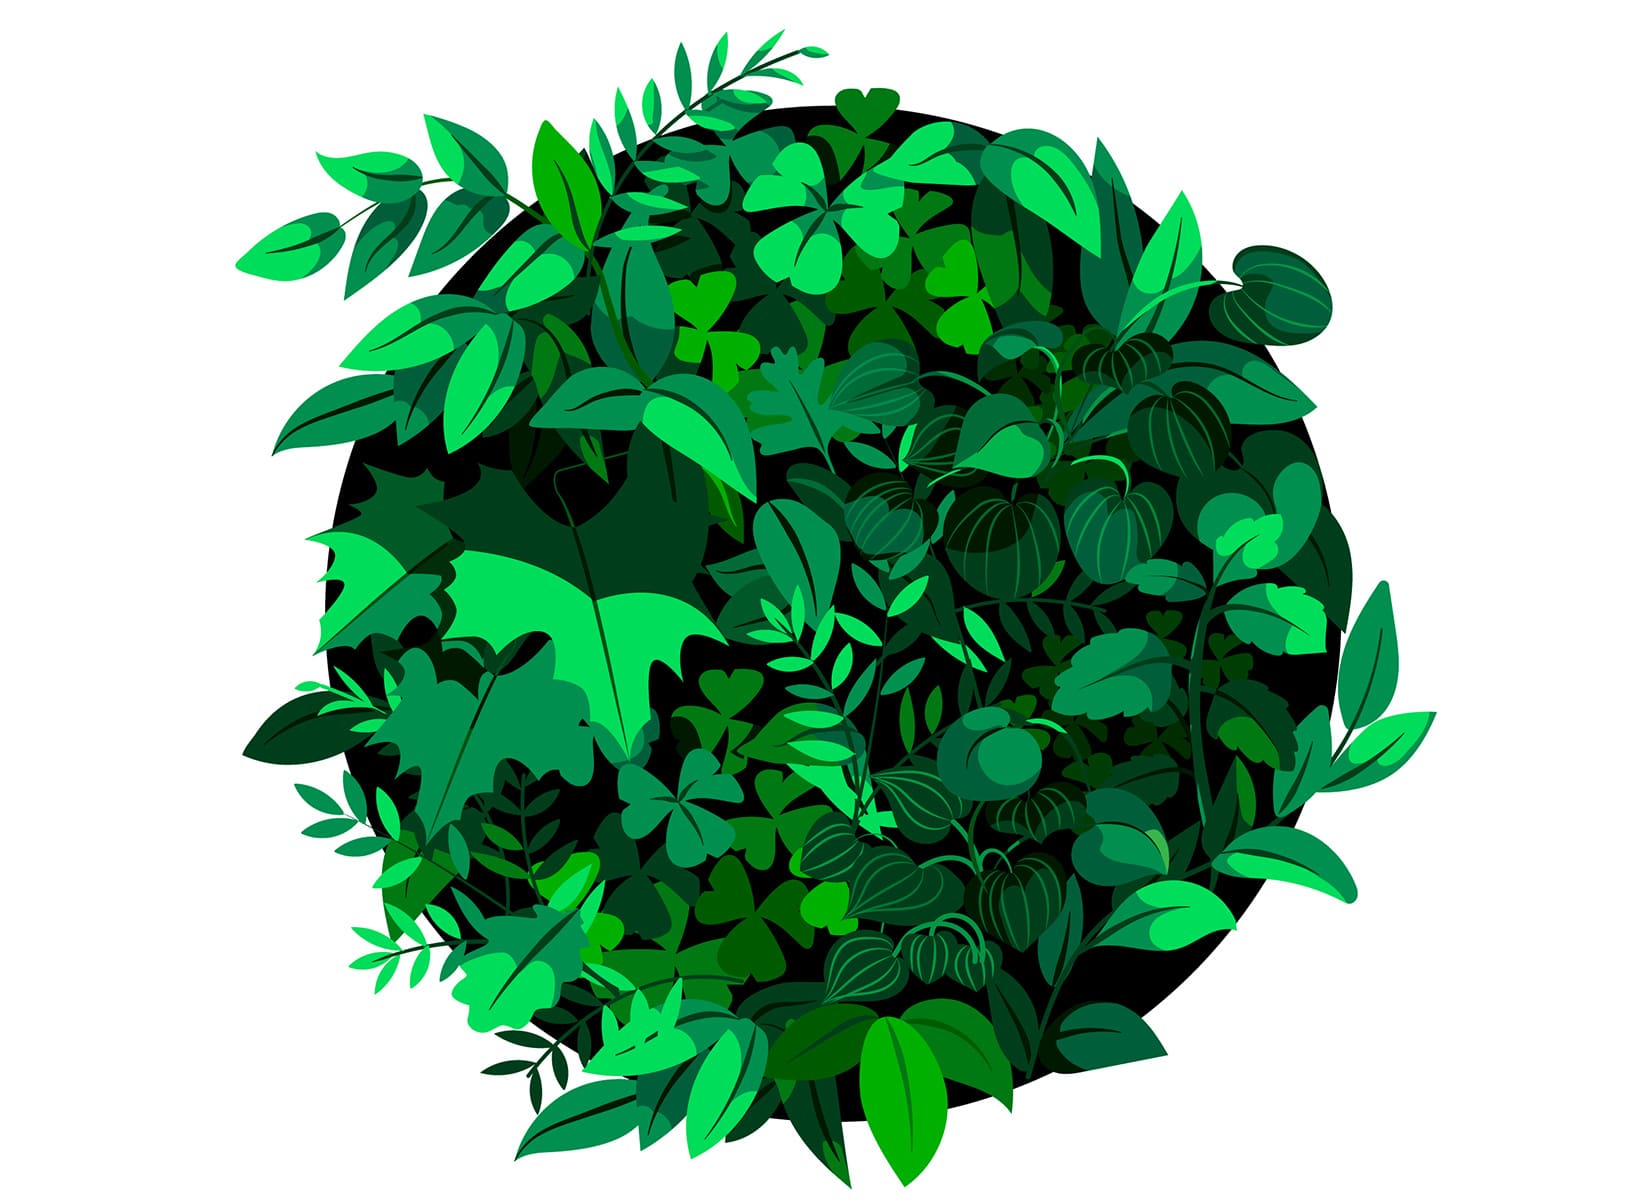 illustration of a circle with green plants